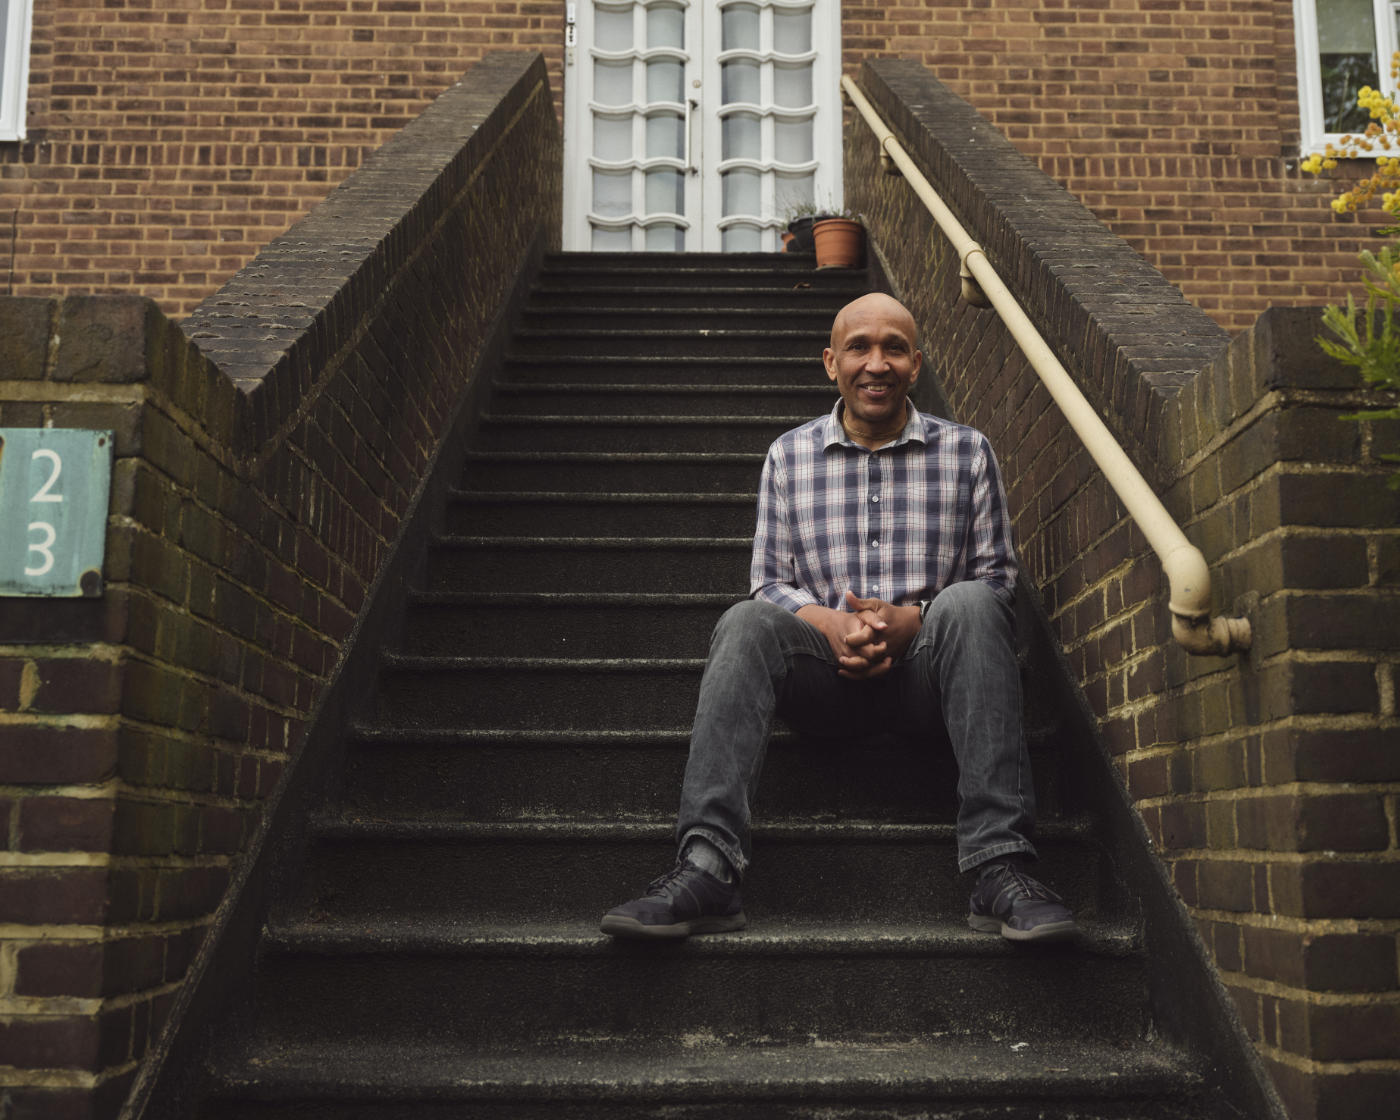 A man sits on the outdoor steps of his housing complex, smiling at the camera